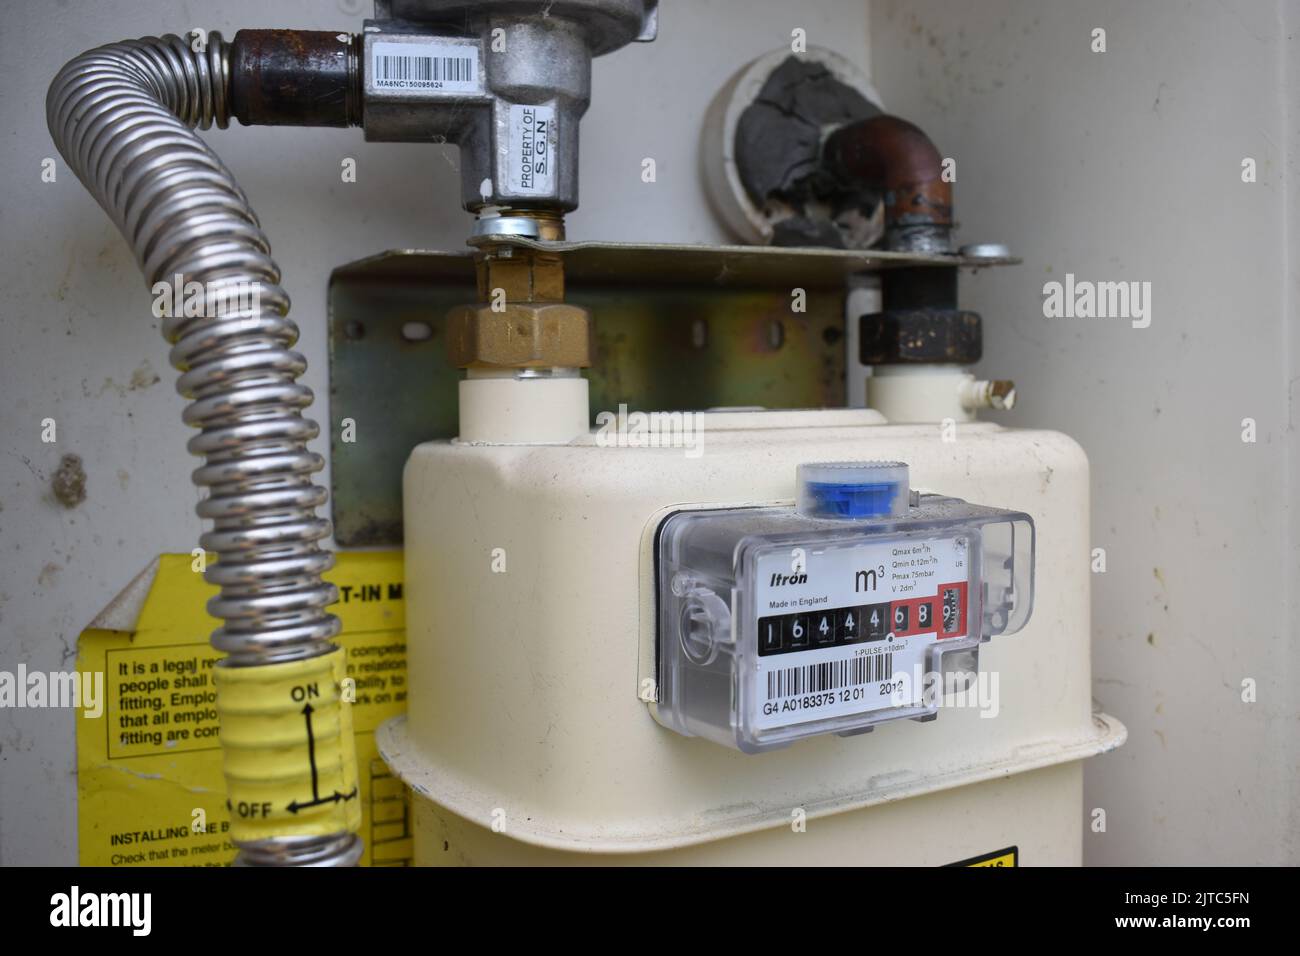 A gas meter Stock Photo